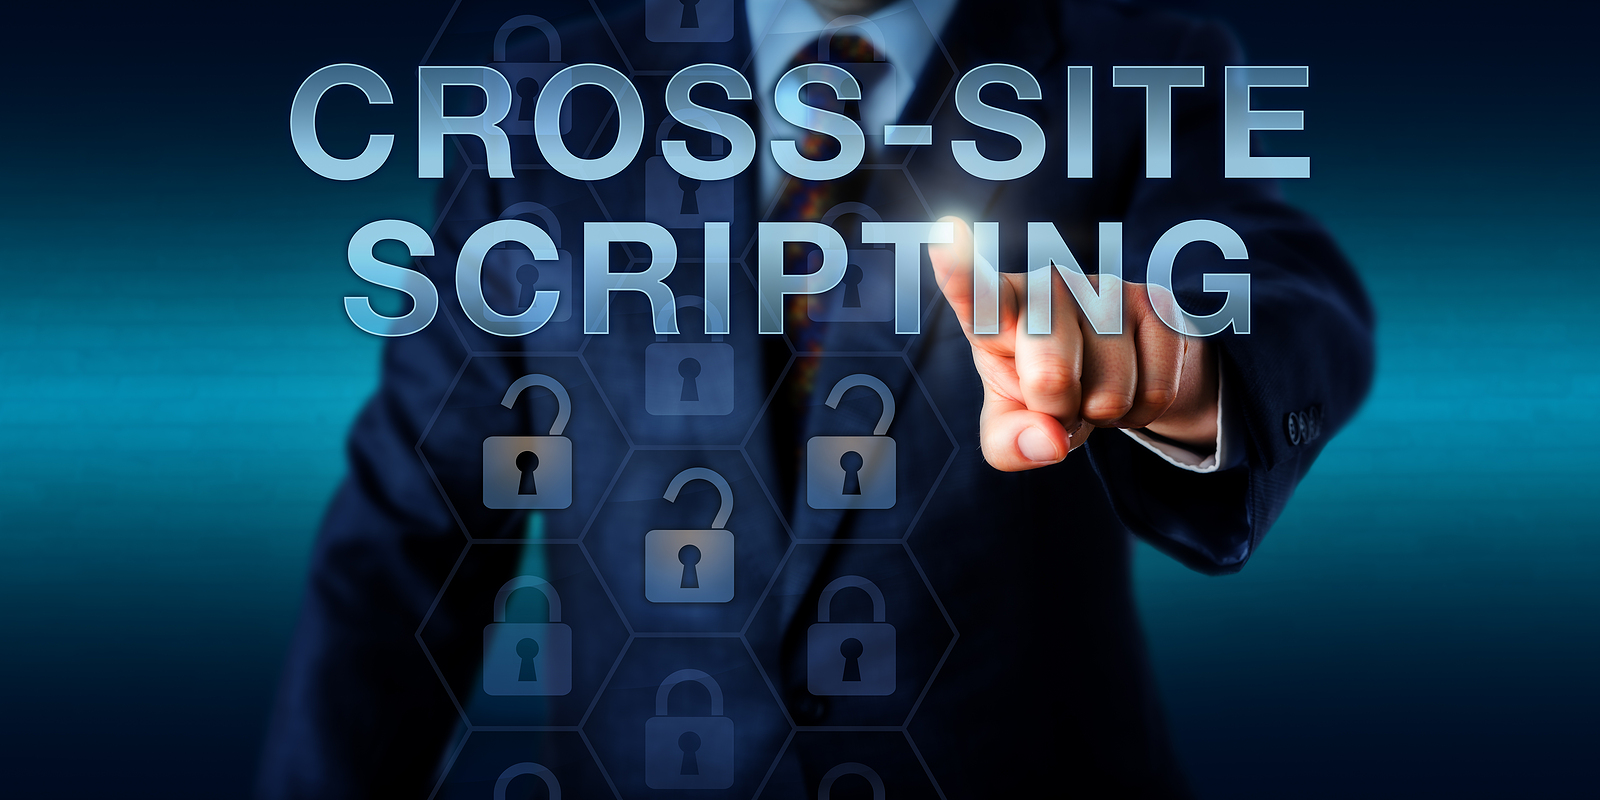 What are Cross-Site Scripting (XSS) Attacks?